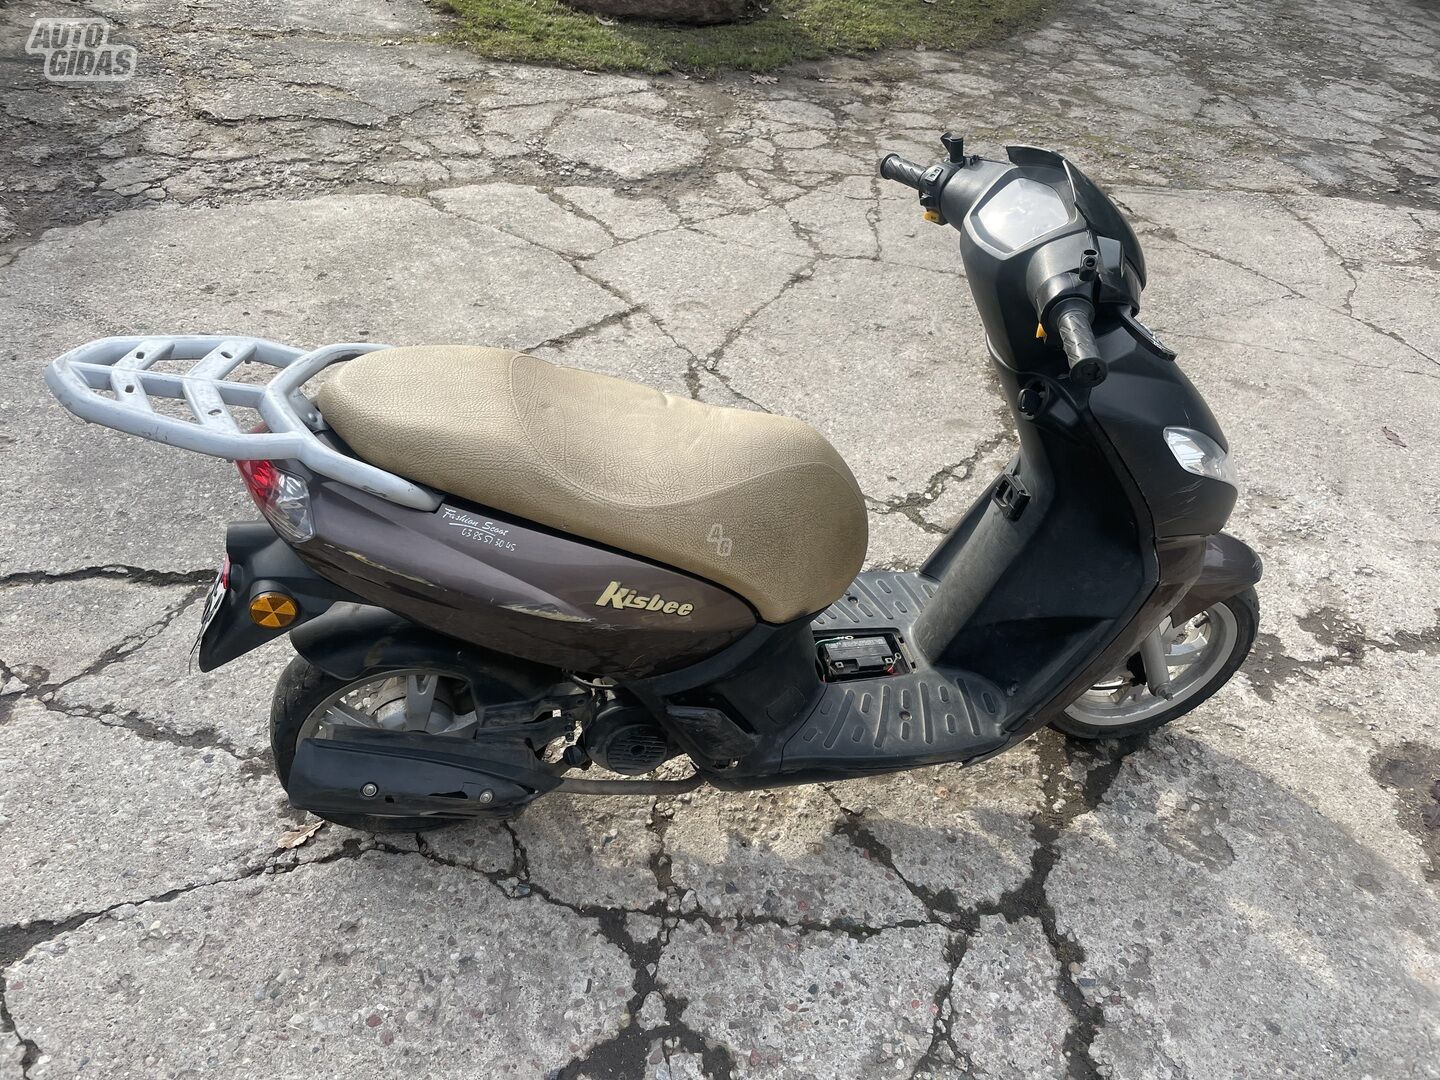 Scooter / moped Peugeot Kisbee 2016 y parts